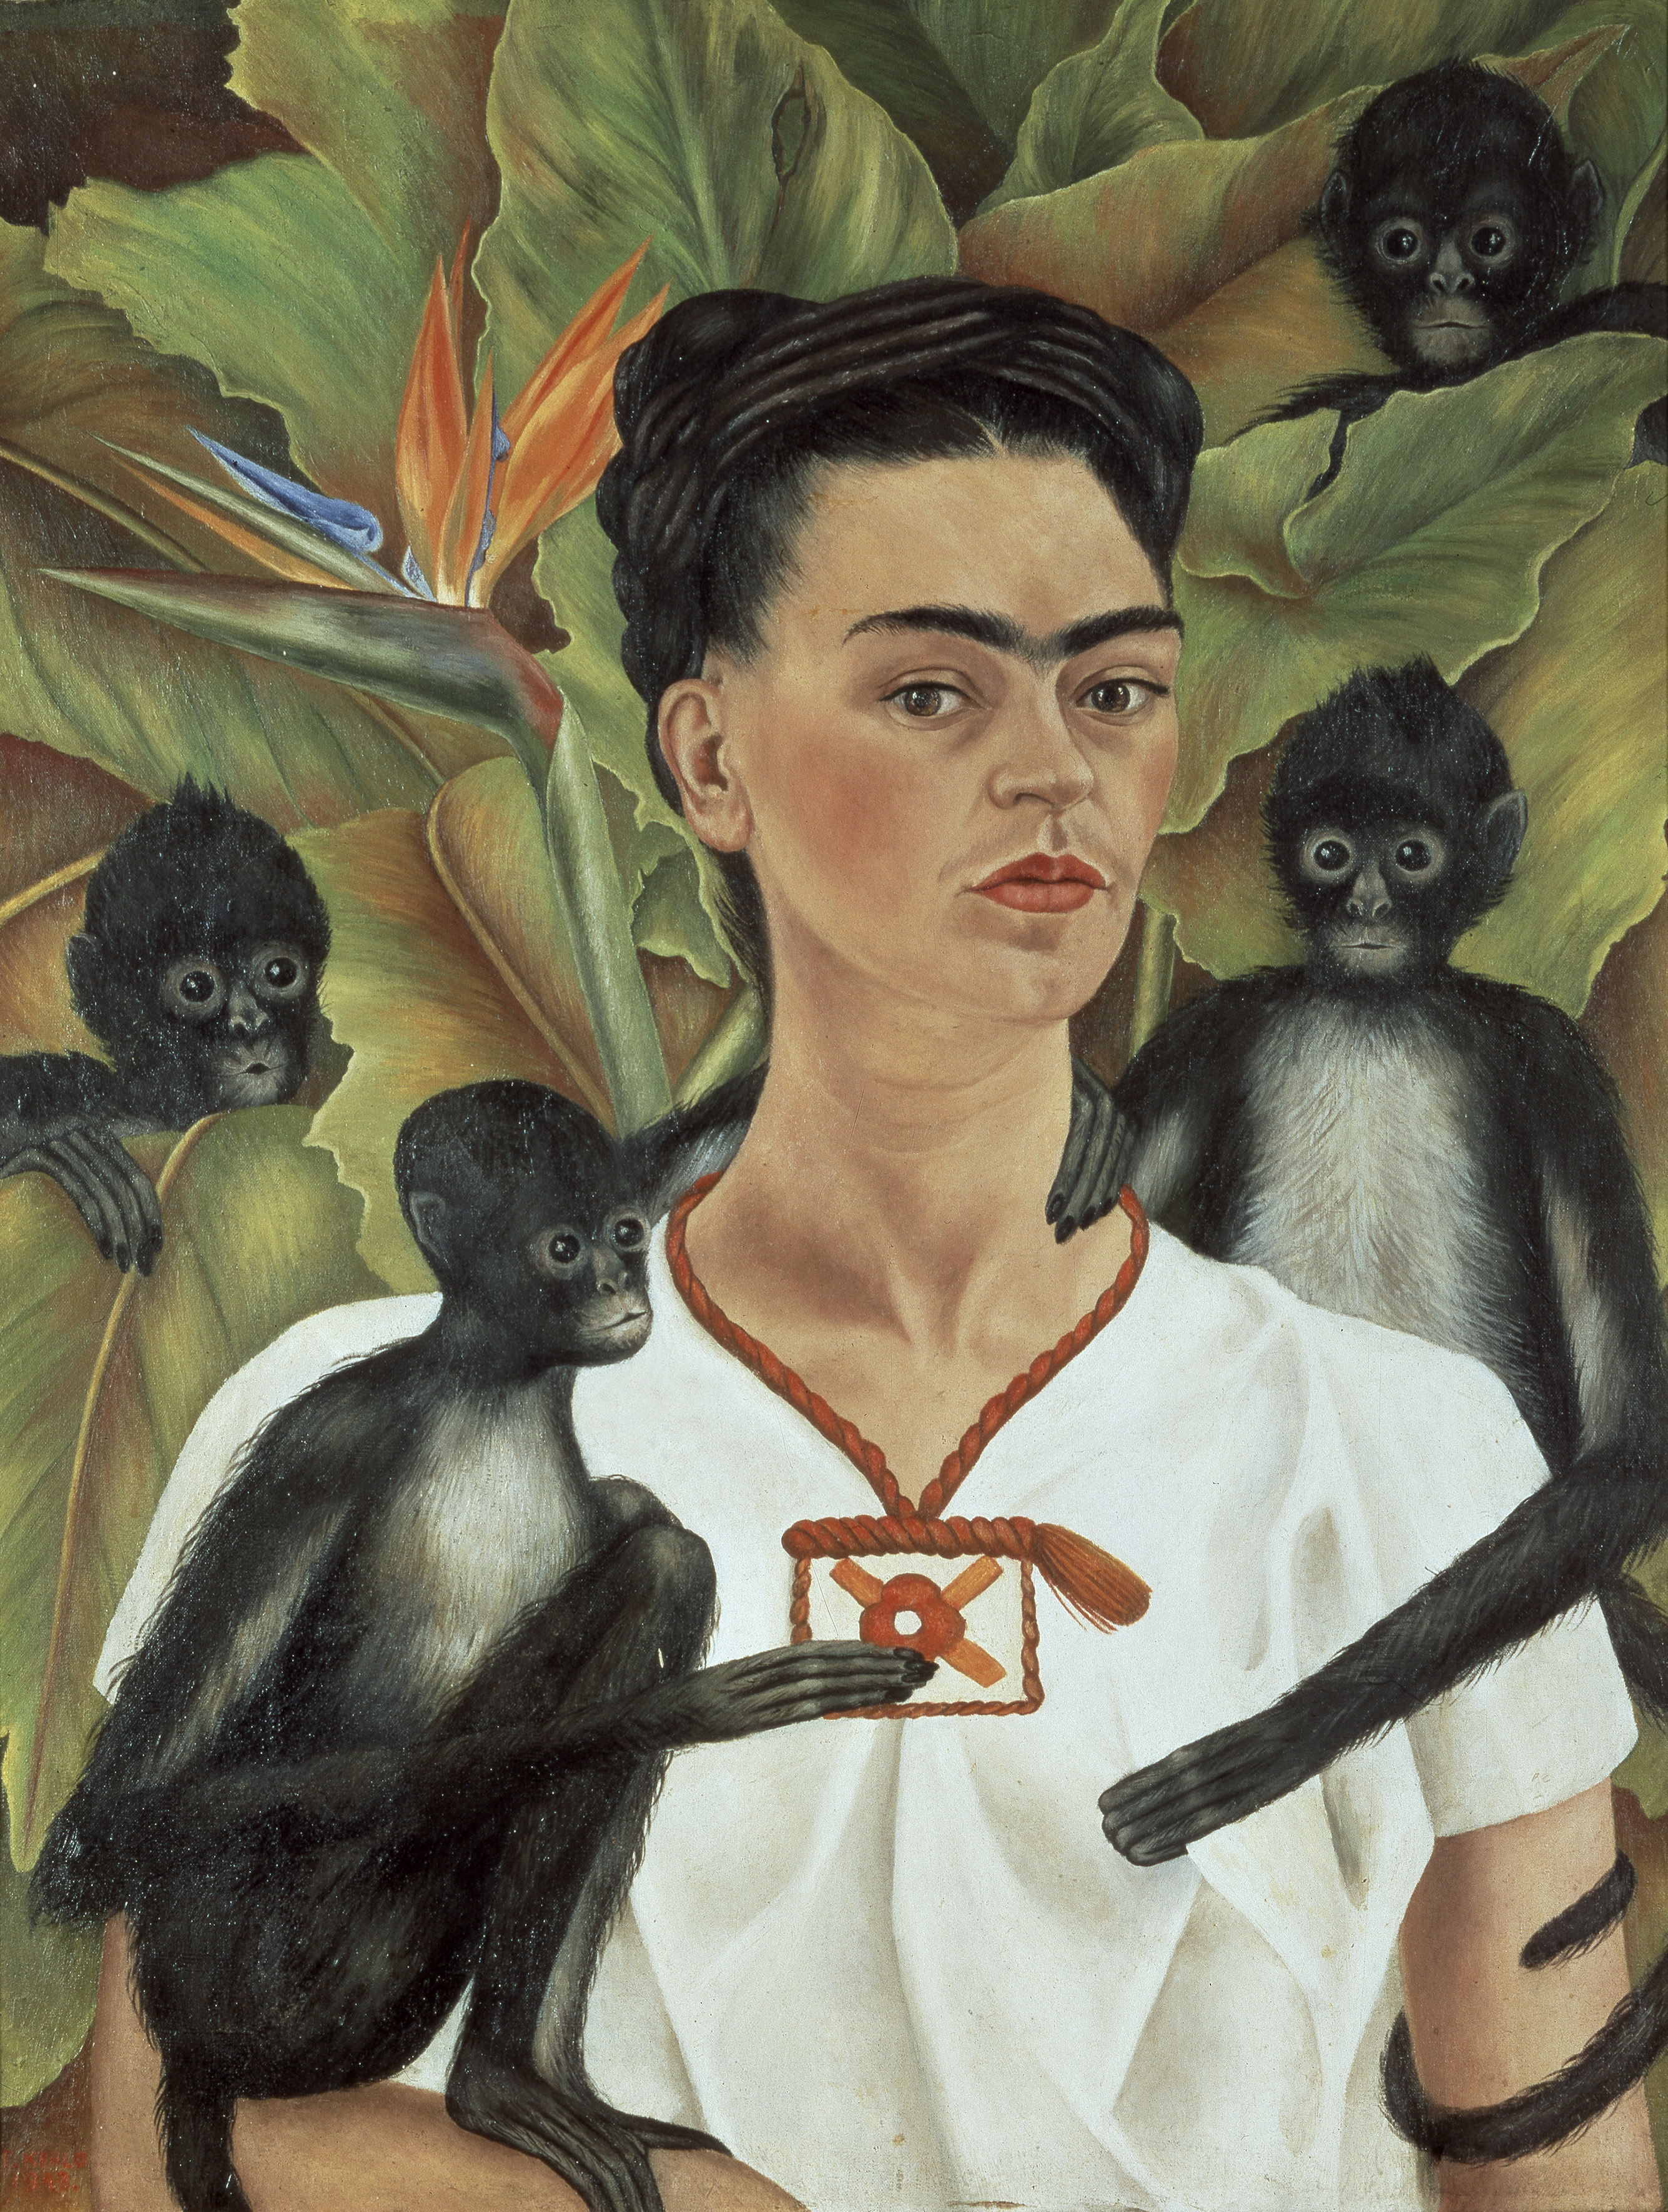 <p><strong>Frida Kahlo</strong> <em>Self-Portrait with Monkeys</em> 1943. The Jacques and Natasha Gelman Collection of 20th Century Mexican Art and the Vergel Foundation. Photo by Gerardo Suter</p>